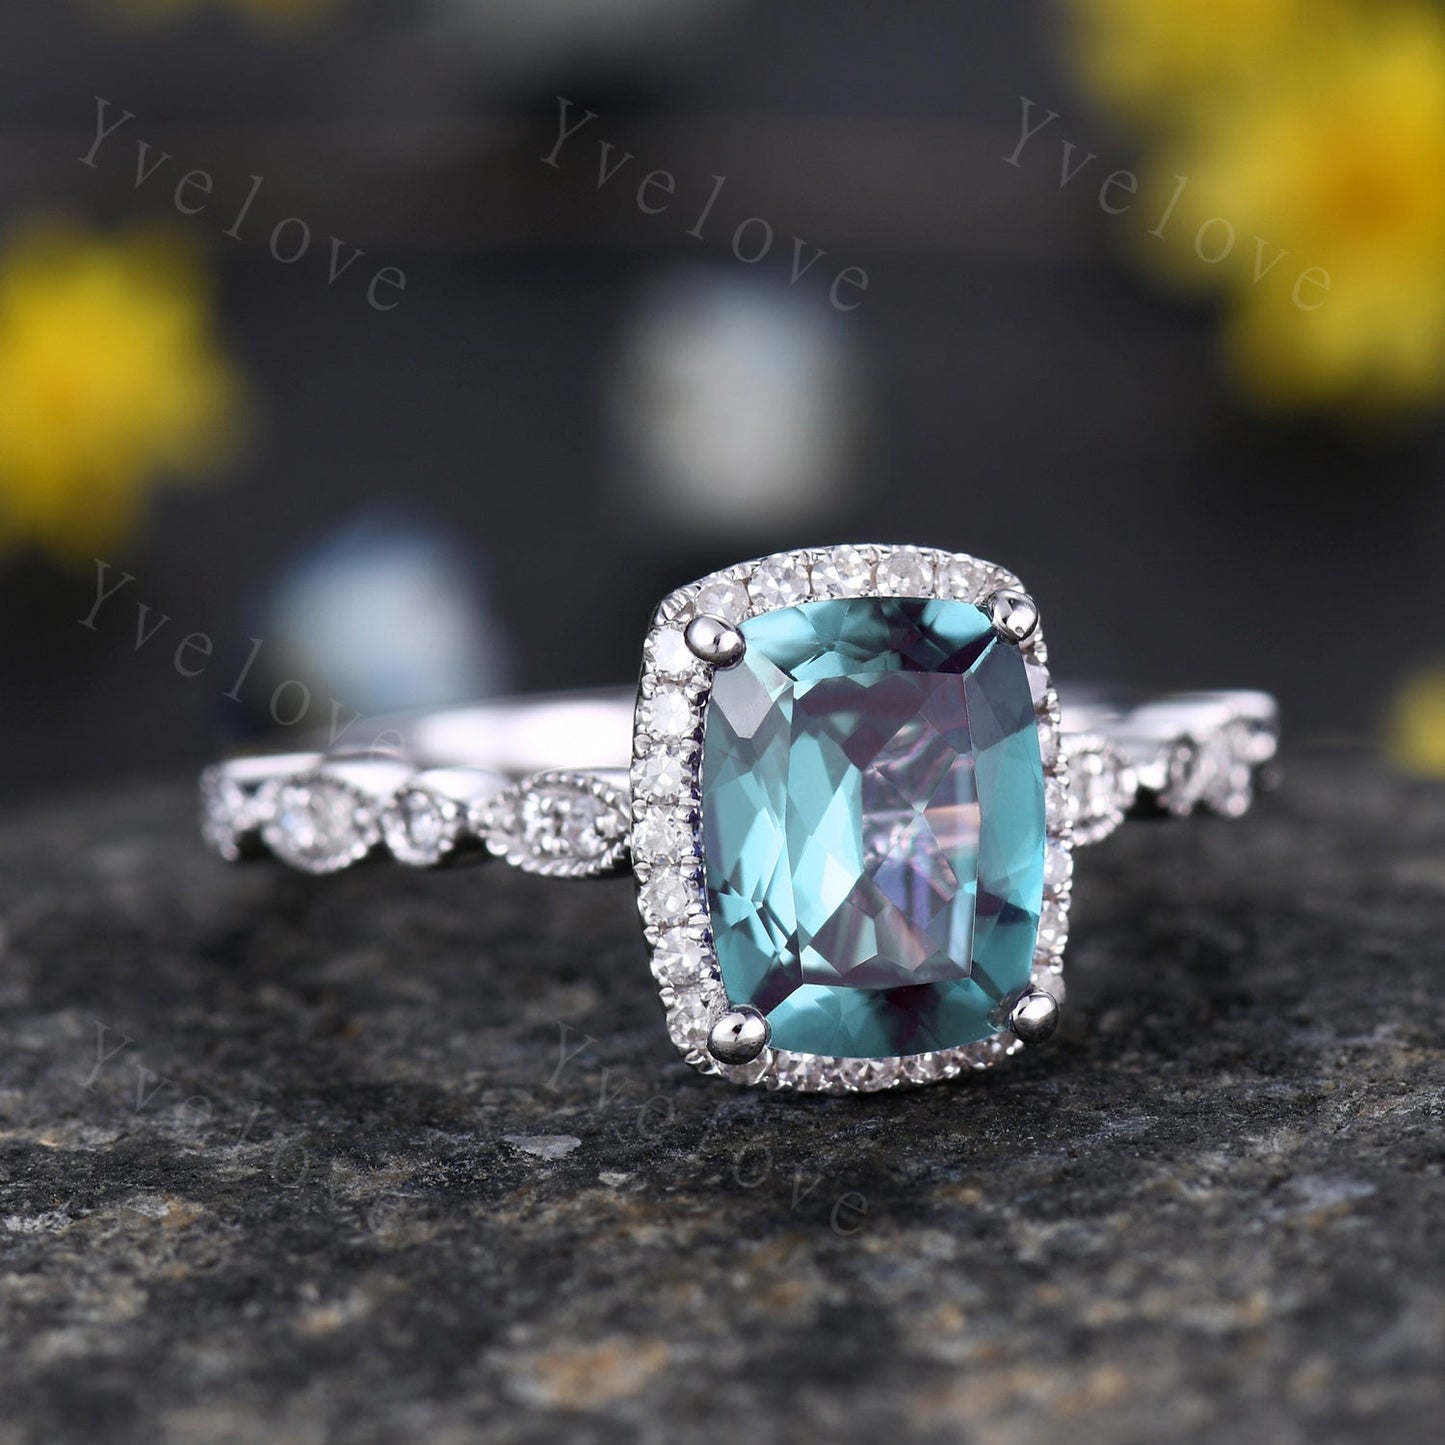 14K White Gold Cushion Alexandrite Engagement Ring Color-changing Alexandrite Ring Art Deco Halo 6x8mm Diamond Pave Wedding Ring Set for her